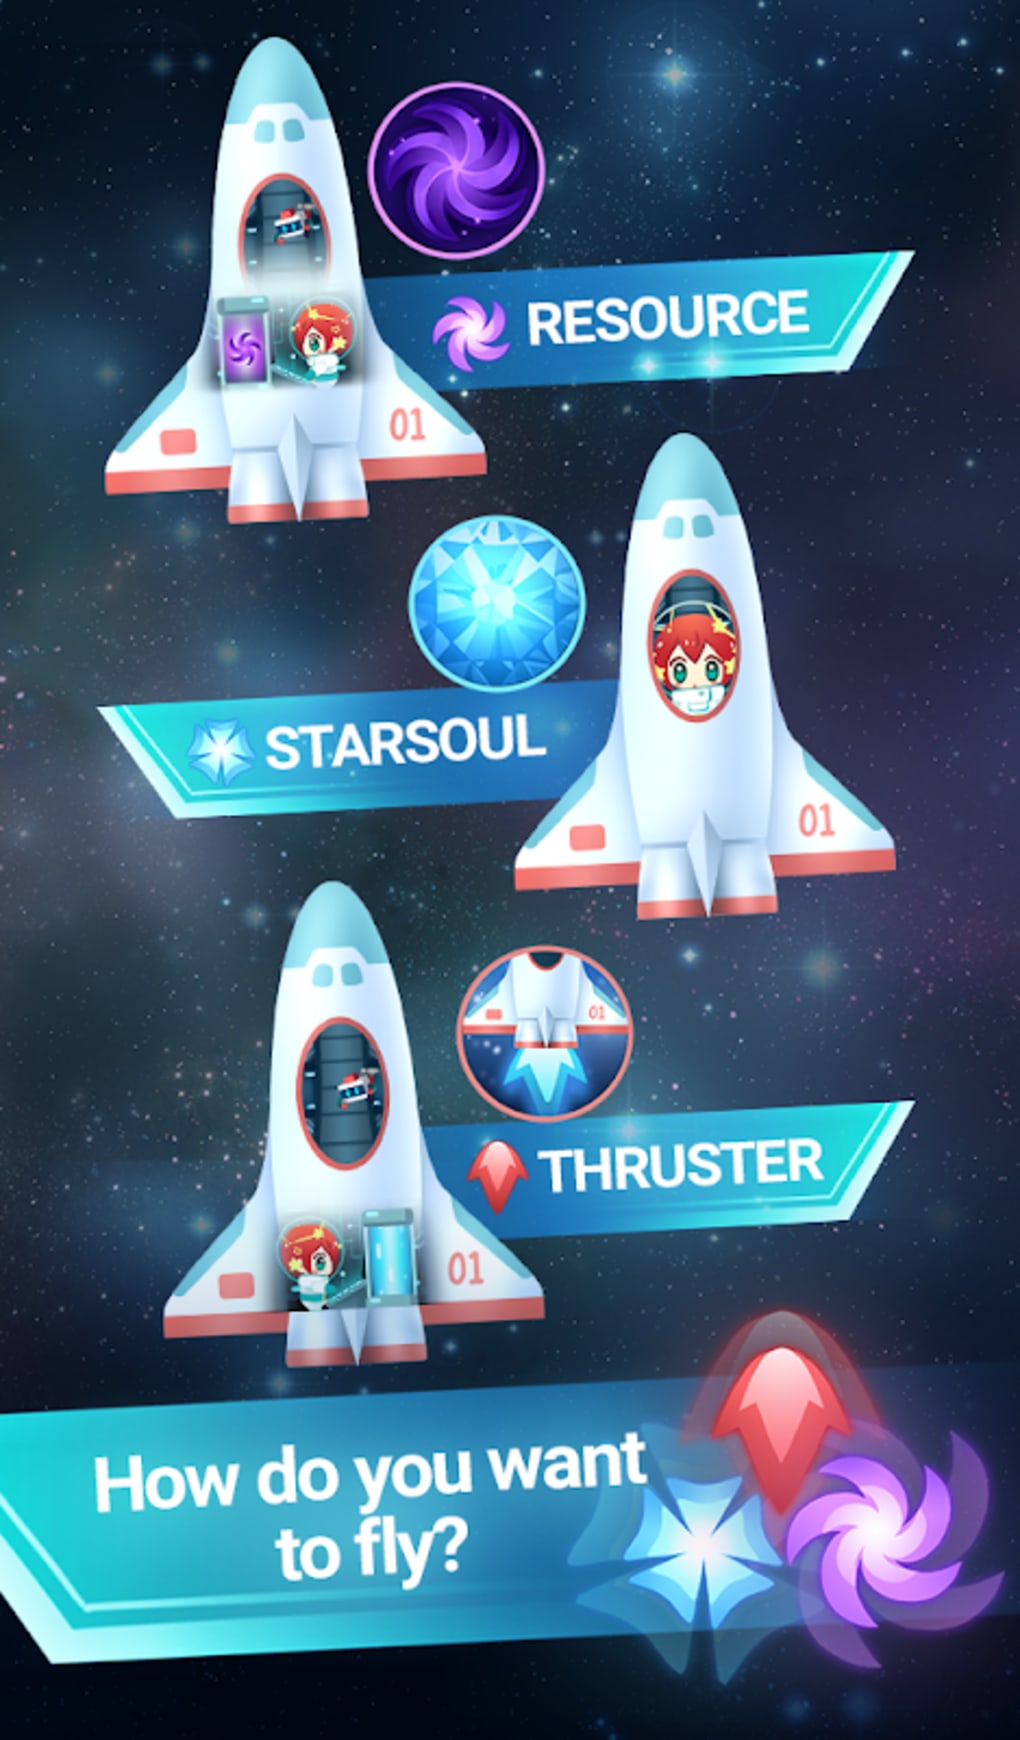 Space Bar Clicker APK for Android Download